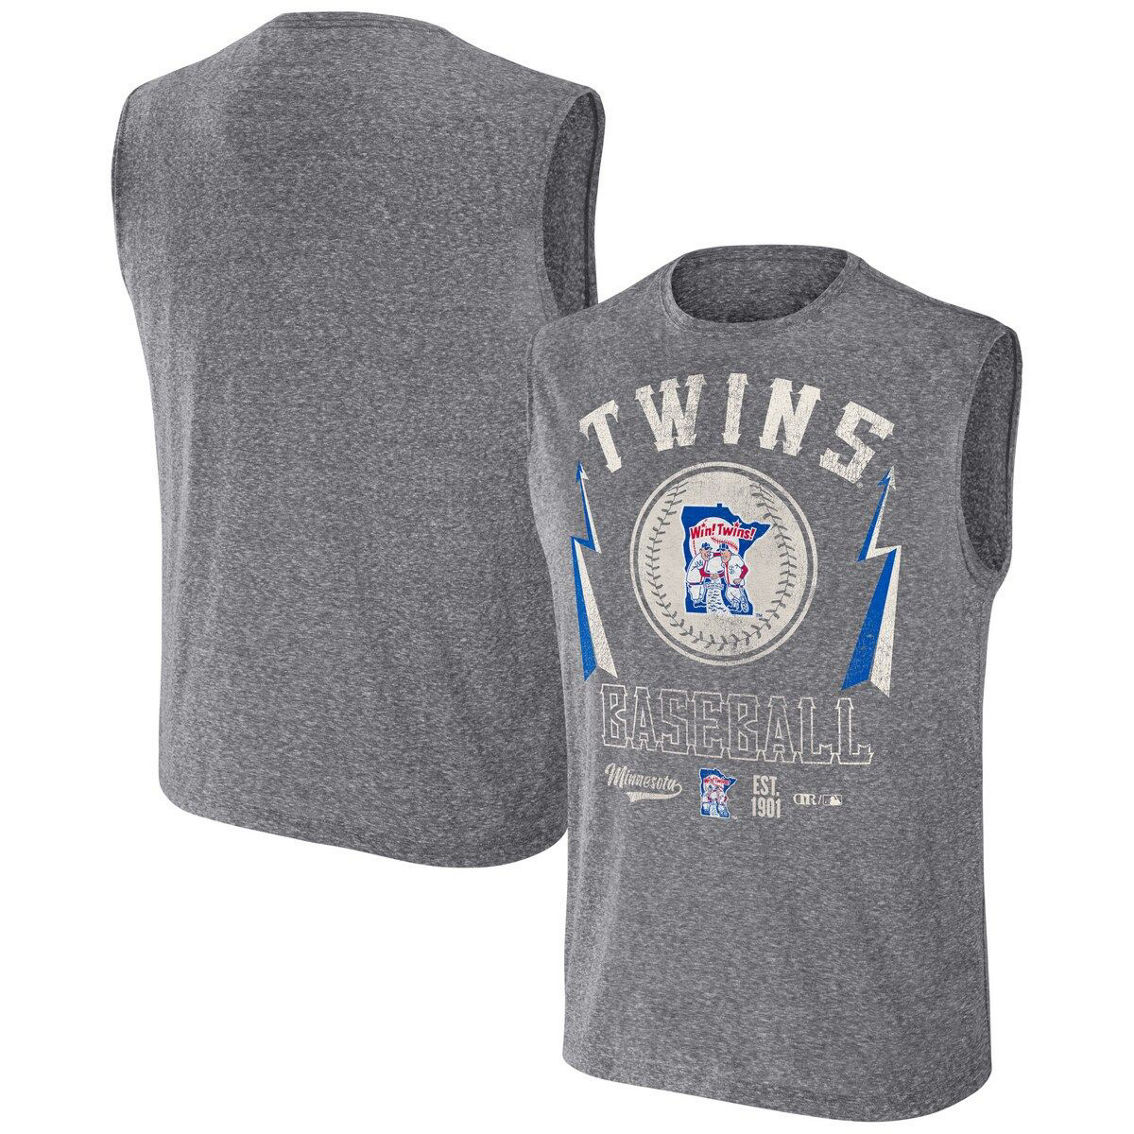 Darius Rucker Collection by Fanatics Men's Darius Rucker Collection by Fanatics Charcoal Minnesota Twins Muscle Tank Top - Image 2 of 4